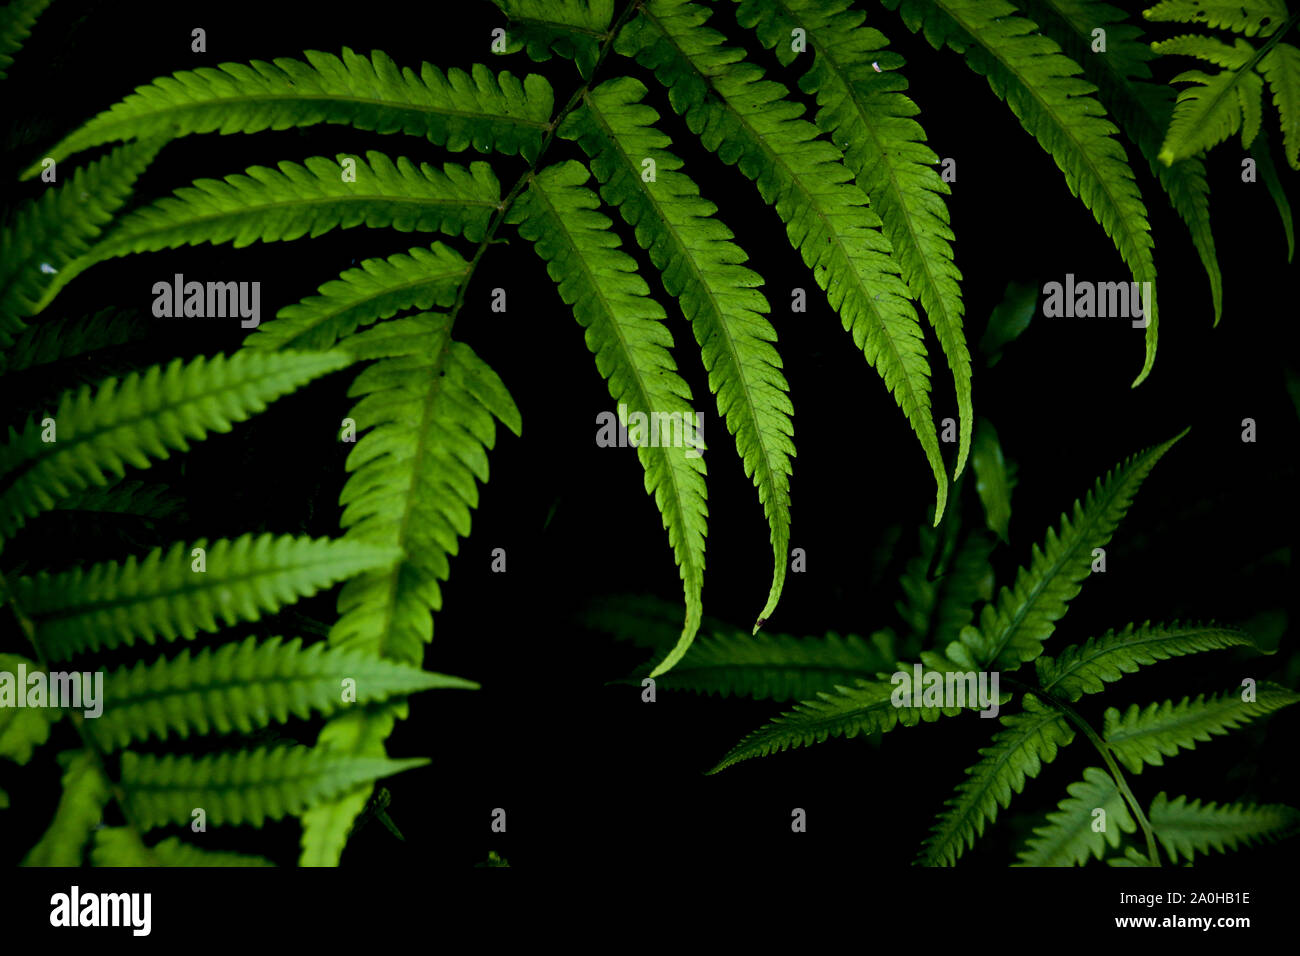 Fresh rich texture of fern leaves against a dark background to show growth, wellness, harmony and freshness Stock Photo